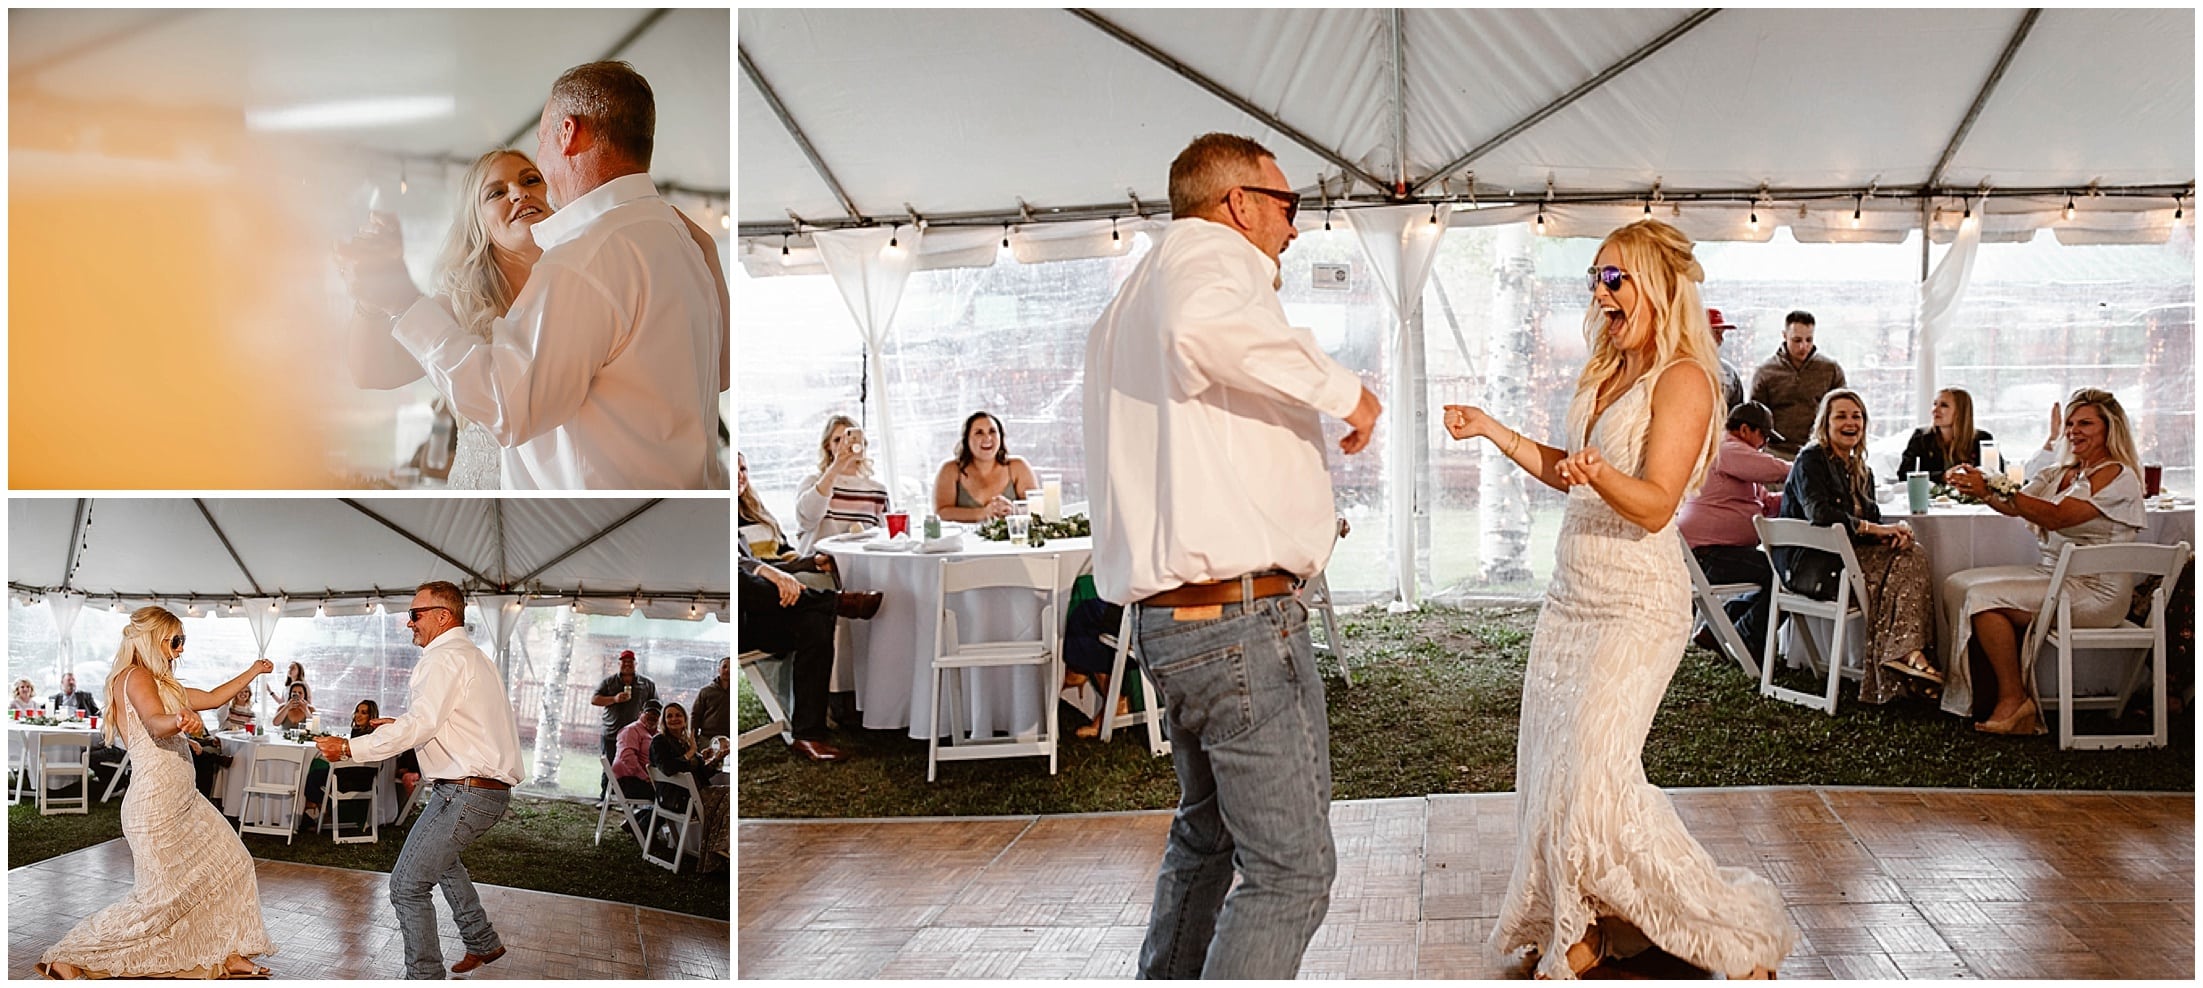 father daughter fun dance at wedding with sunglasses Aspen Lodge, Red River New Mexico, Red River New Mexico Wedding, Weddings in New Mexico, Destination mountain wedding, destination mountain elopement, elopements in new mexico, places to get married in new mexico, destination elopement photographer, mountain wedding photographer, new mexico wedding photographer, new mexico elopement photographer, brit nicole photography, cabin wedding, new mexico cabin wedding, mountain landscape for wedding, small intimate mountain wedding, small intimate river wedding, wedding photographer in new mexico, junebug weddings, the knot, wedding wire, 41 productions with lindsay gomez, dallas texas bride, DJ Allen Gallegos, Tao Cakes, New Mexico Wedding planner karen kelly, barnes jewelry, Lillian West bridal dress, Lang’s Bridal, enchanted florist wedding flowers, places to get married in texas, texas wedding photographer, texas elopement photographer, forest wedding, forest elopement, wooded area for wedding, wooded elopement, elopement in the woods, amarillo wedding photographer, amarillo elopement photographer